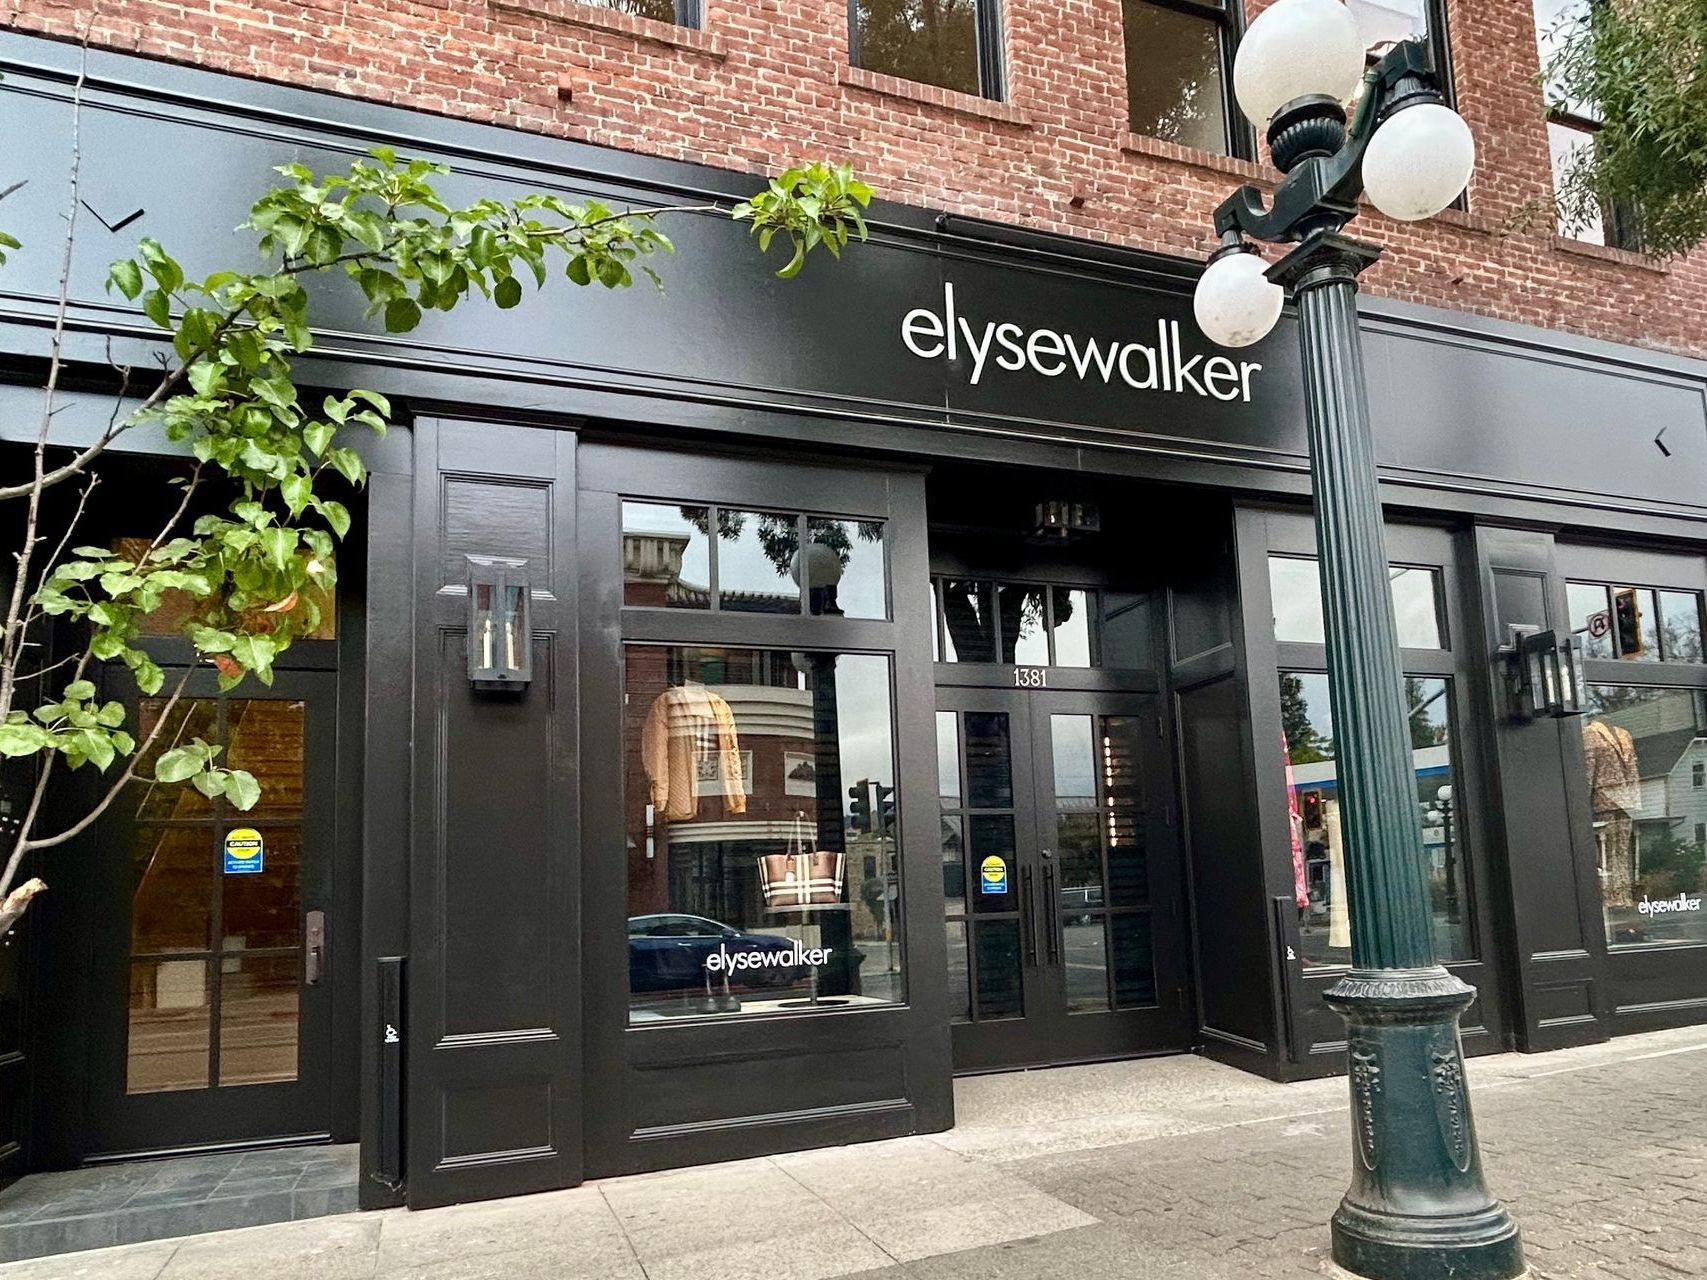 the front of a store called elysewalker